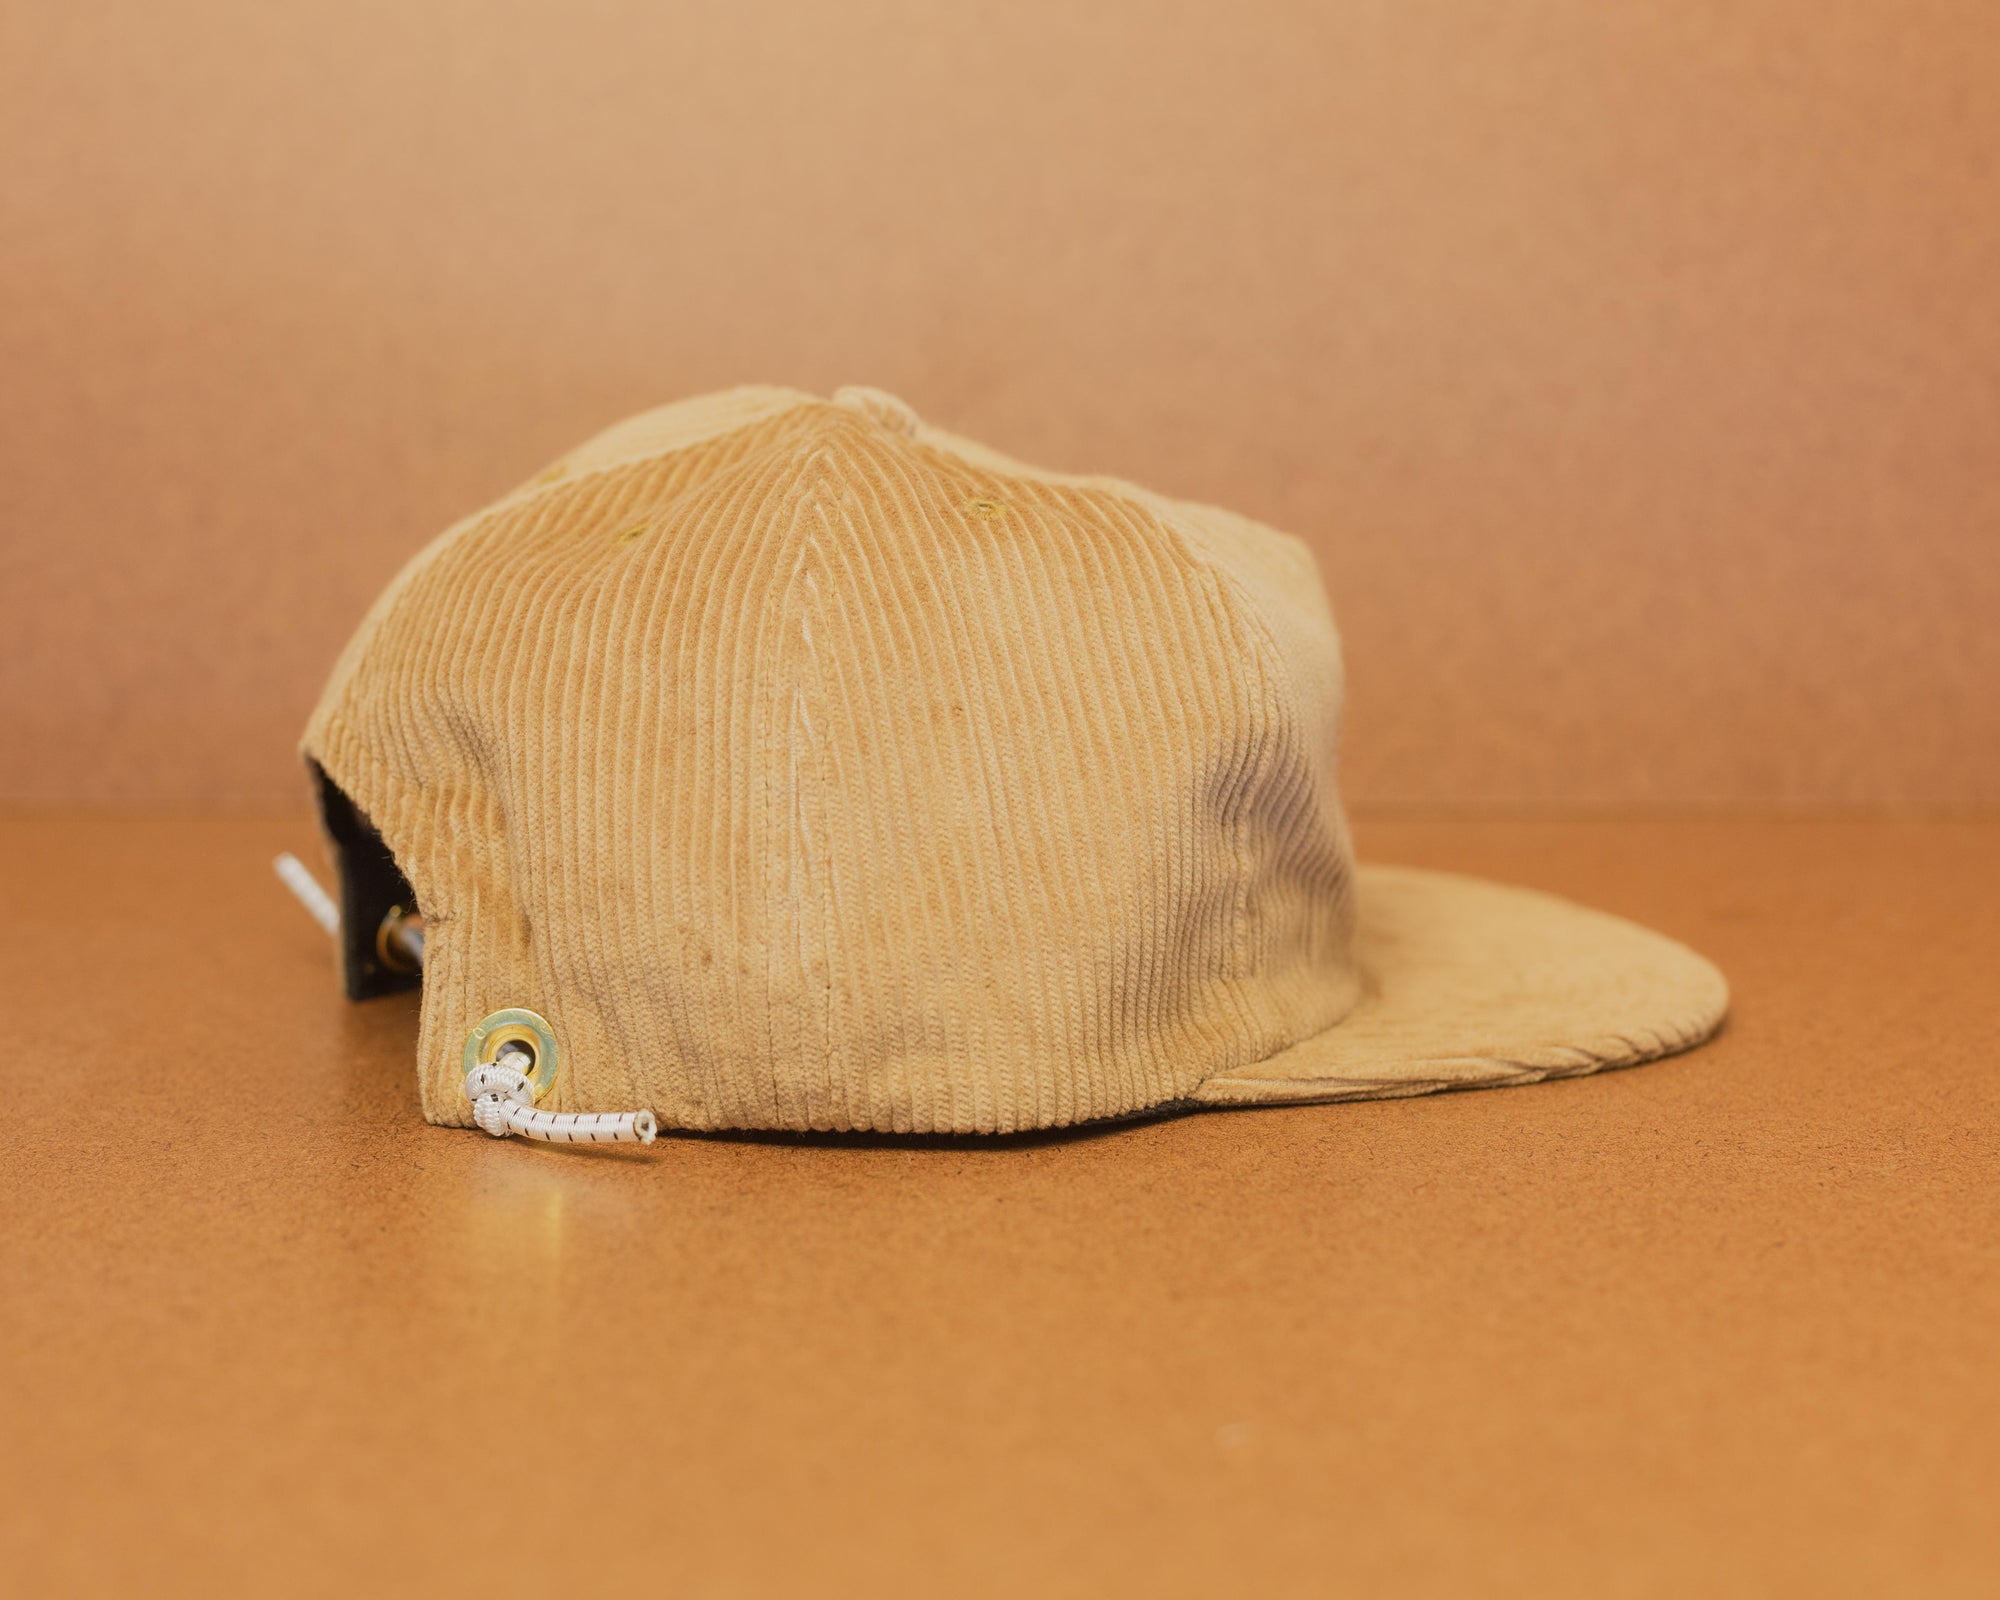 Western Hydrodynamic Research- Whale Cord Hat (Beige) side view brown background